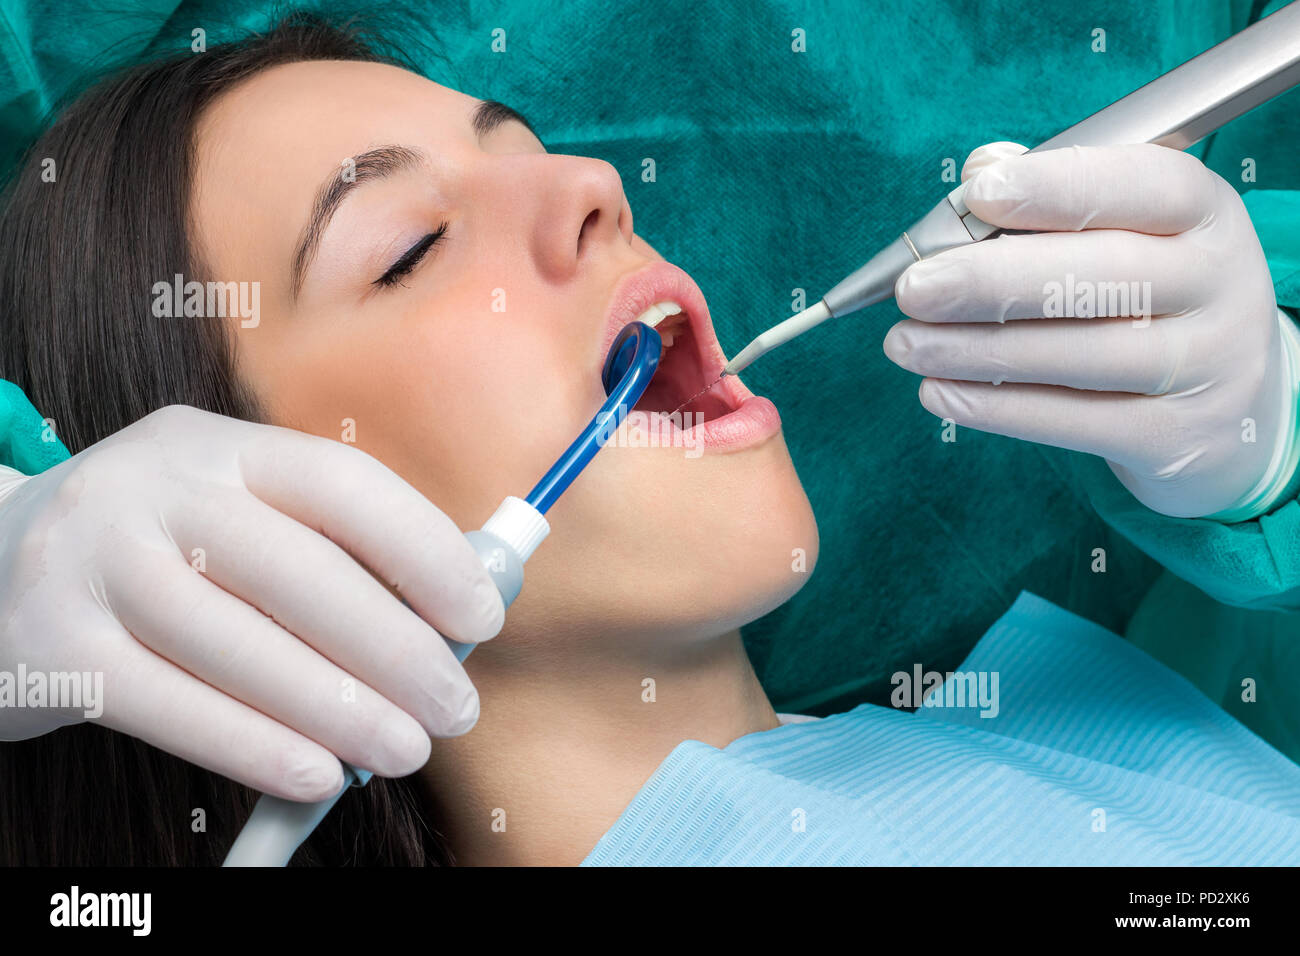 Close up macro face shot of young woman having dental cleaning.Hands wearing gloves working on teeth with saliva ejector and water cleaning unit. Stock Photo